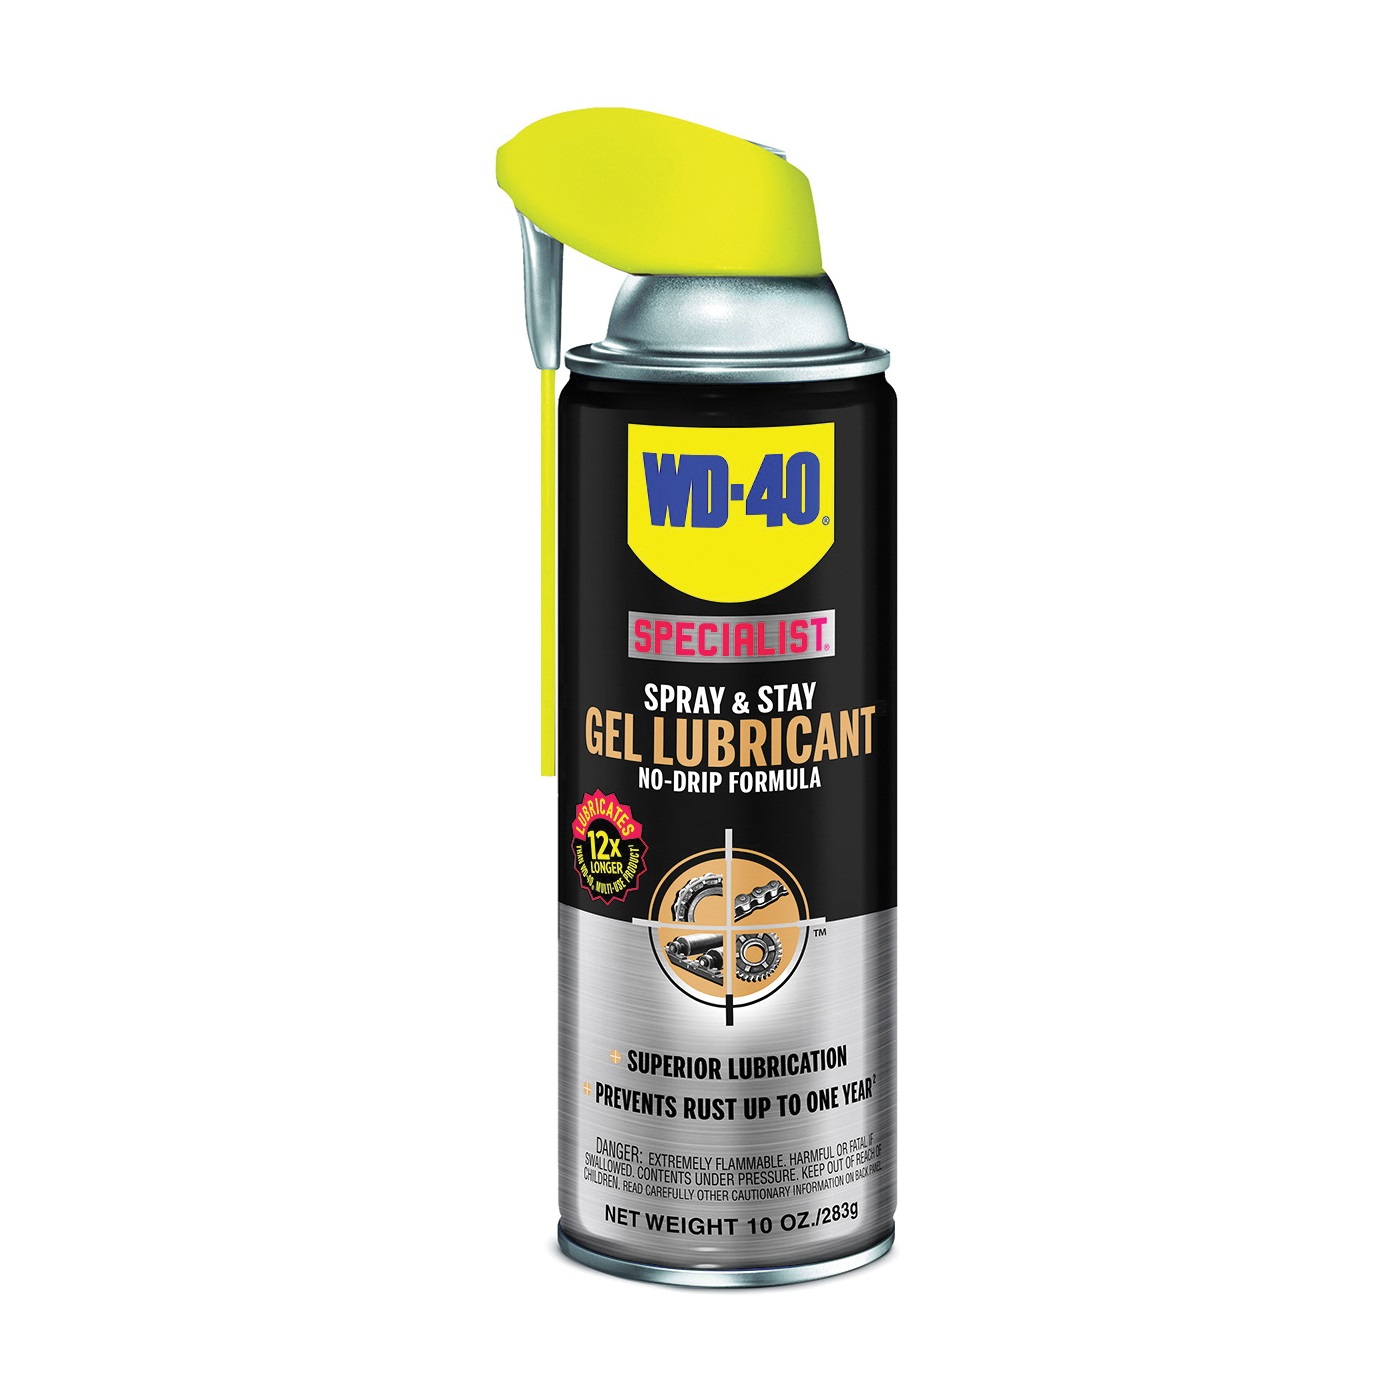 Wd-40 300103